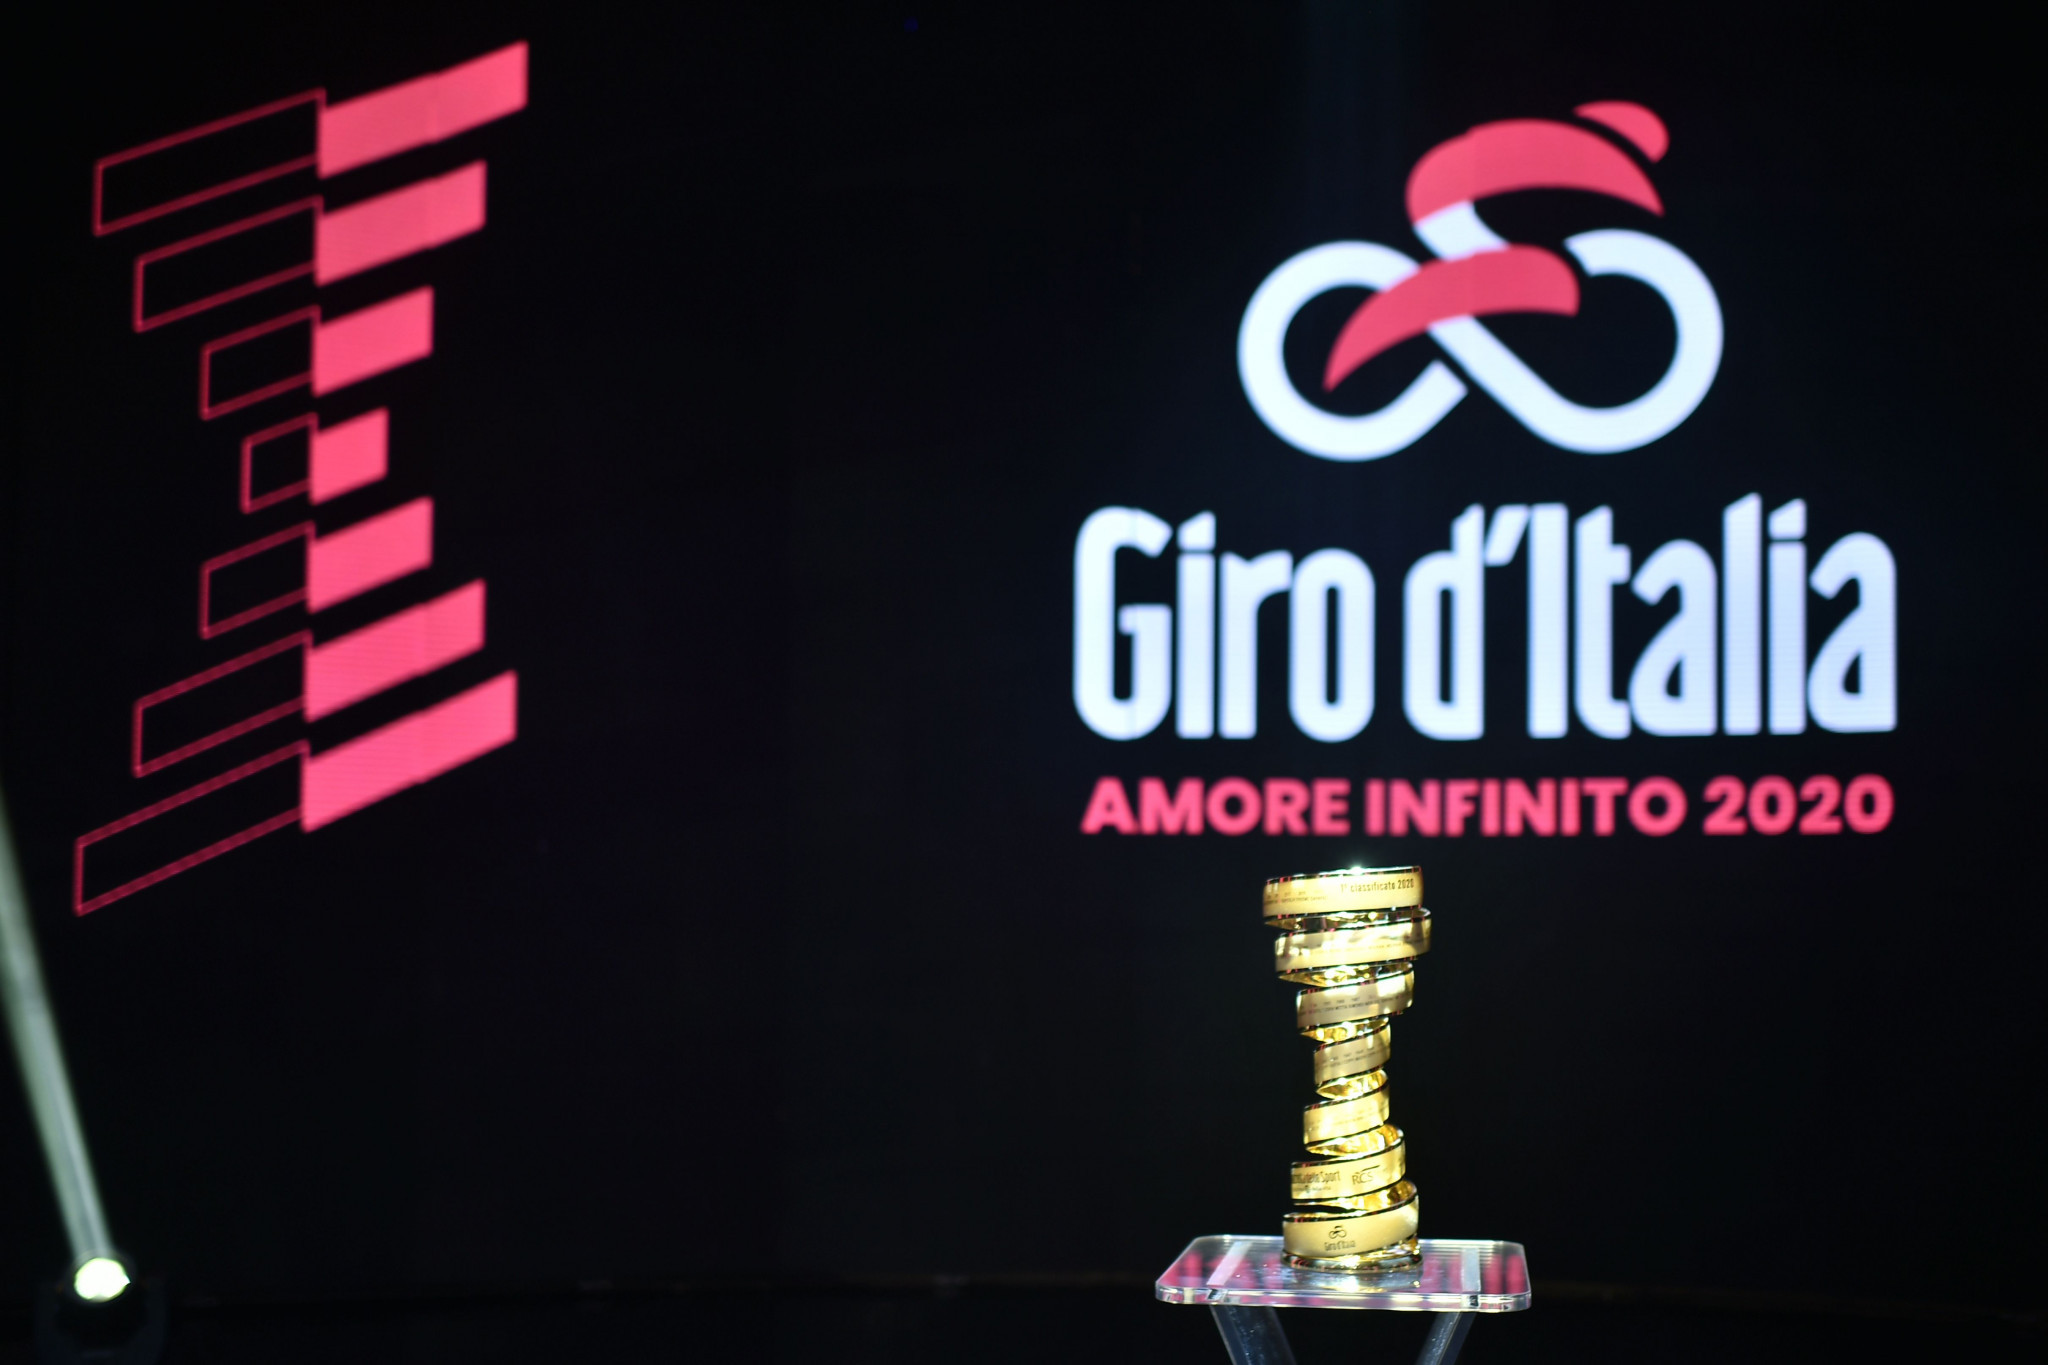 The Giro d'Italia is among the key cycling events to have been impacted by coronavirus ©Getty Images